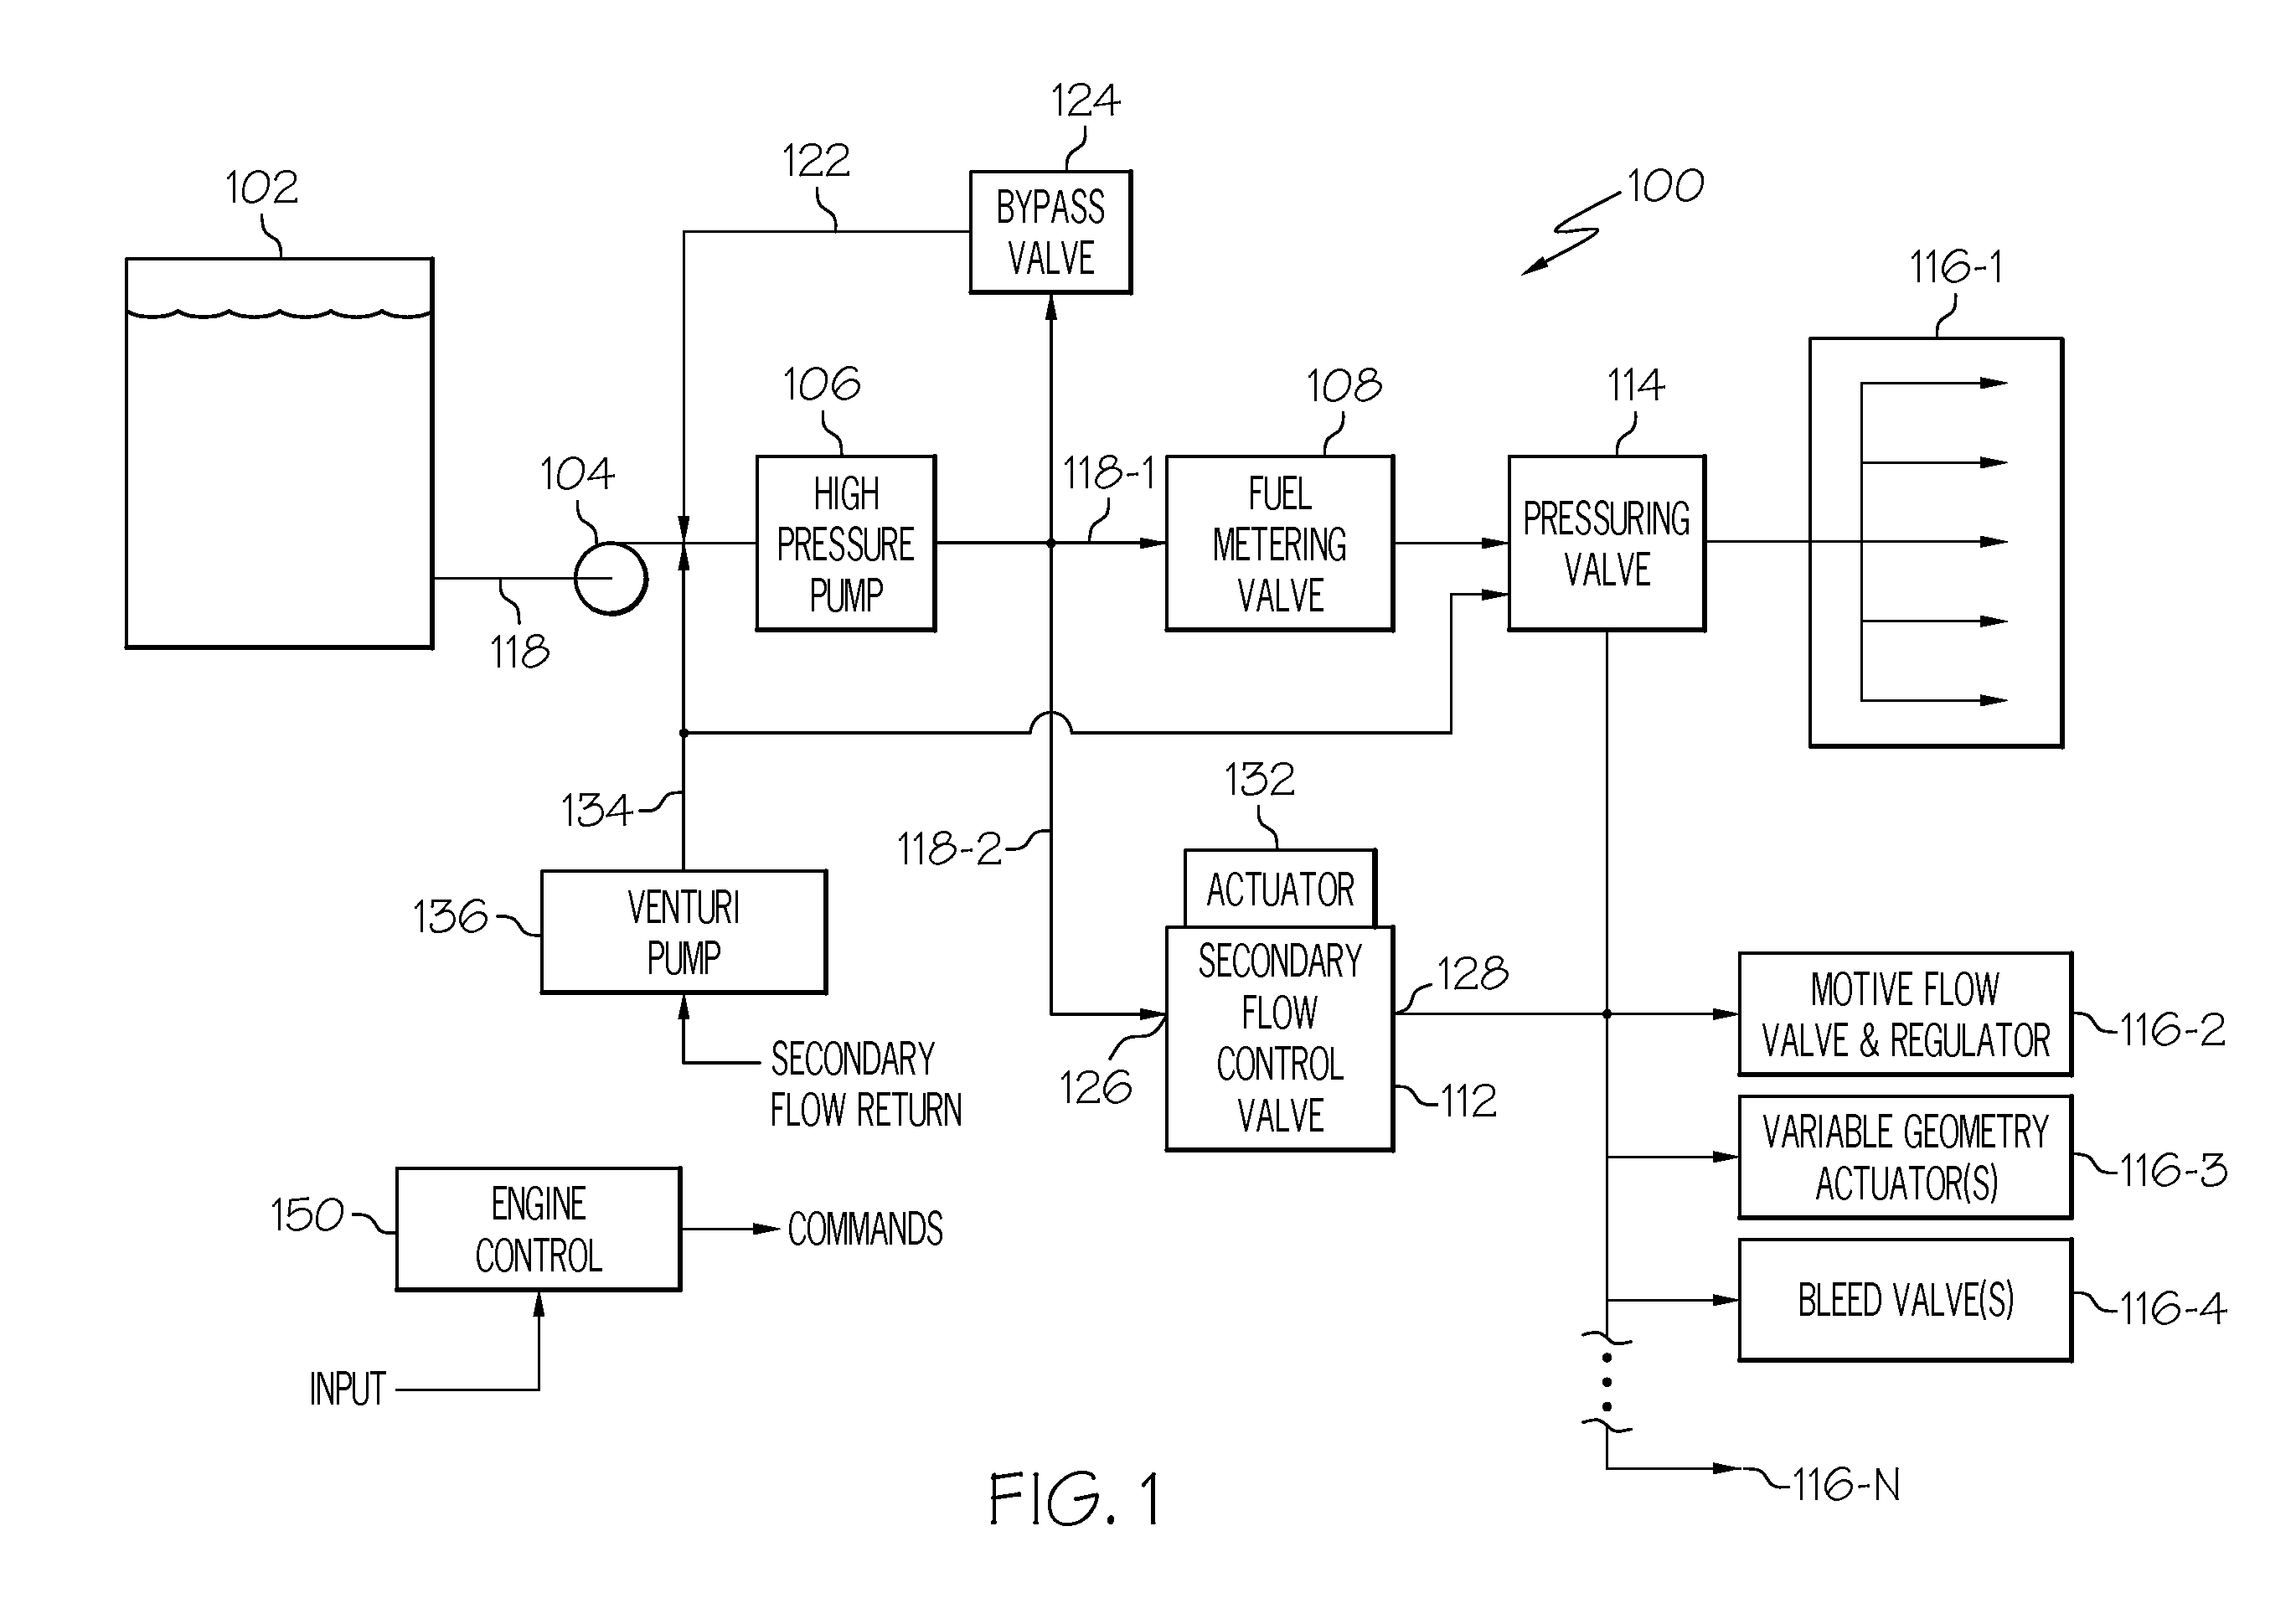 Dual level pressurization control based on fuel flow to one or more gas turbine engine secondary fuel loads